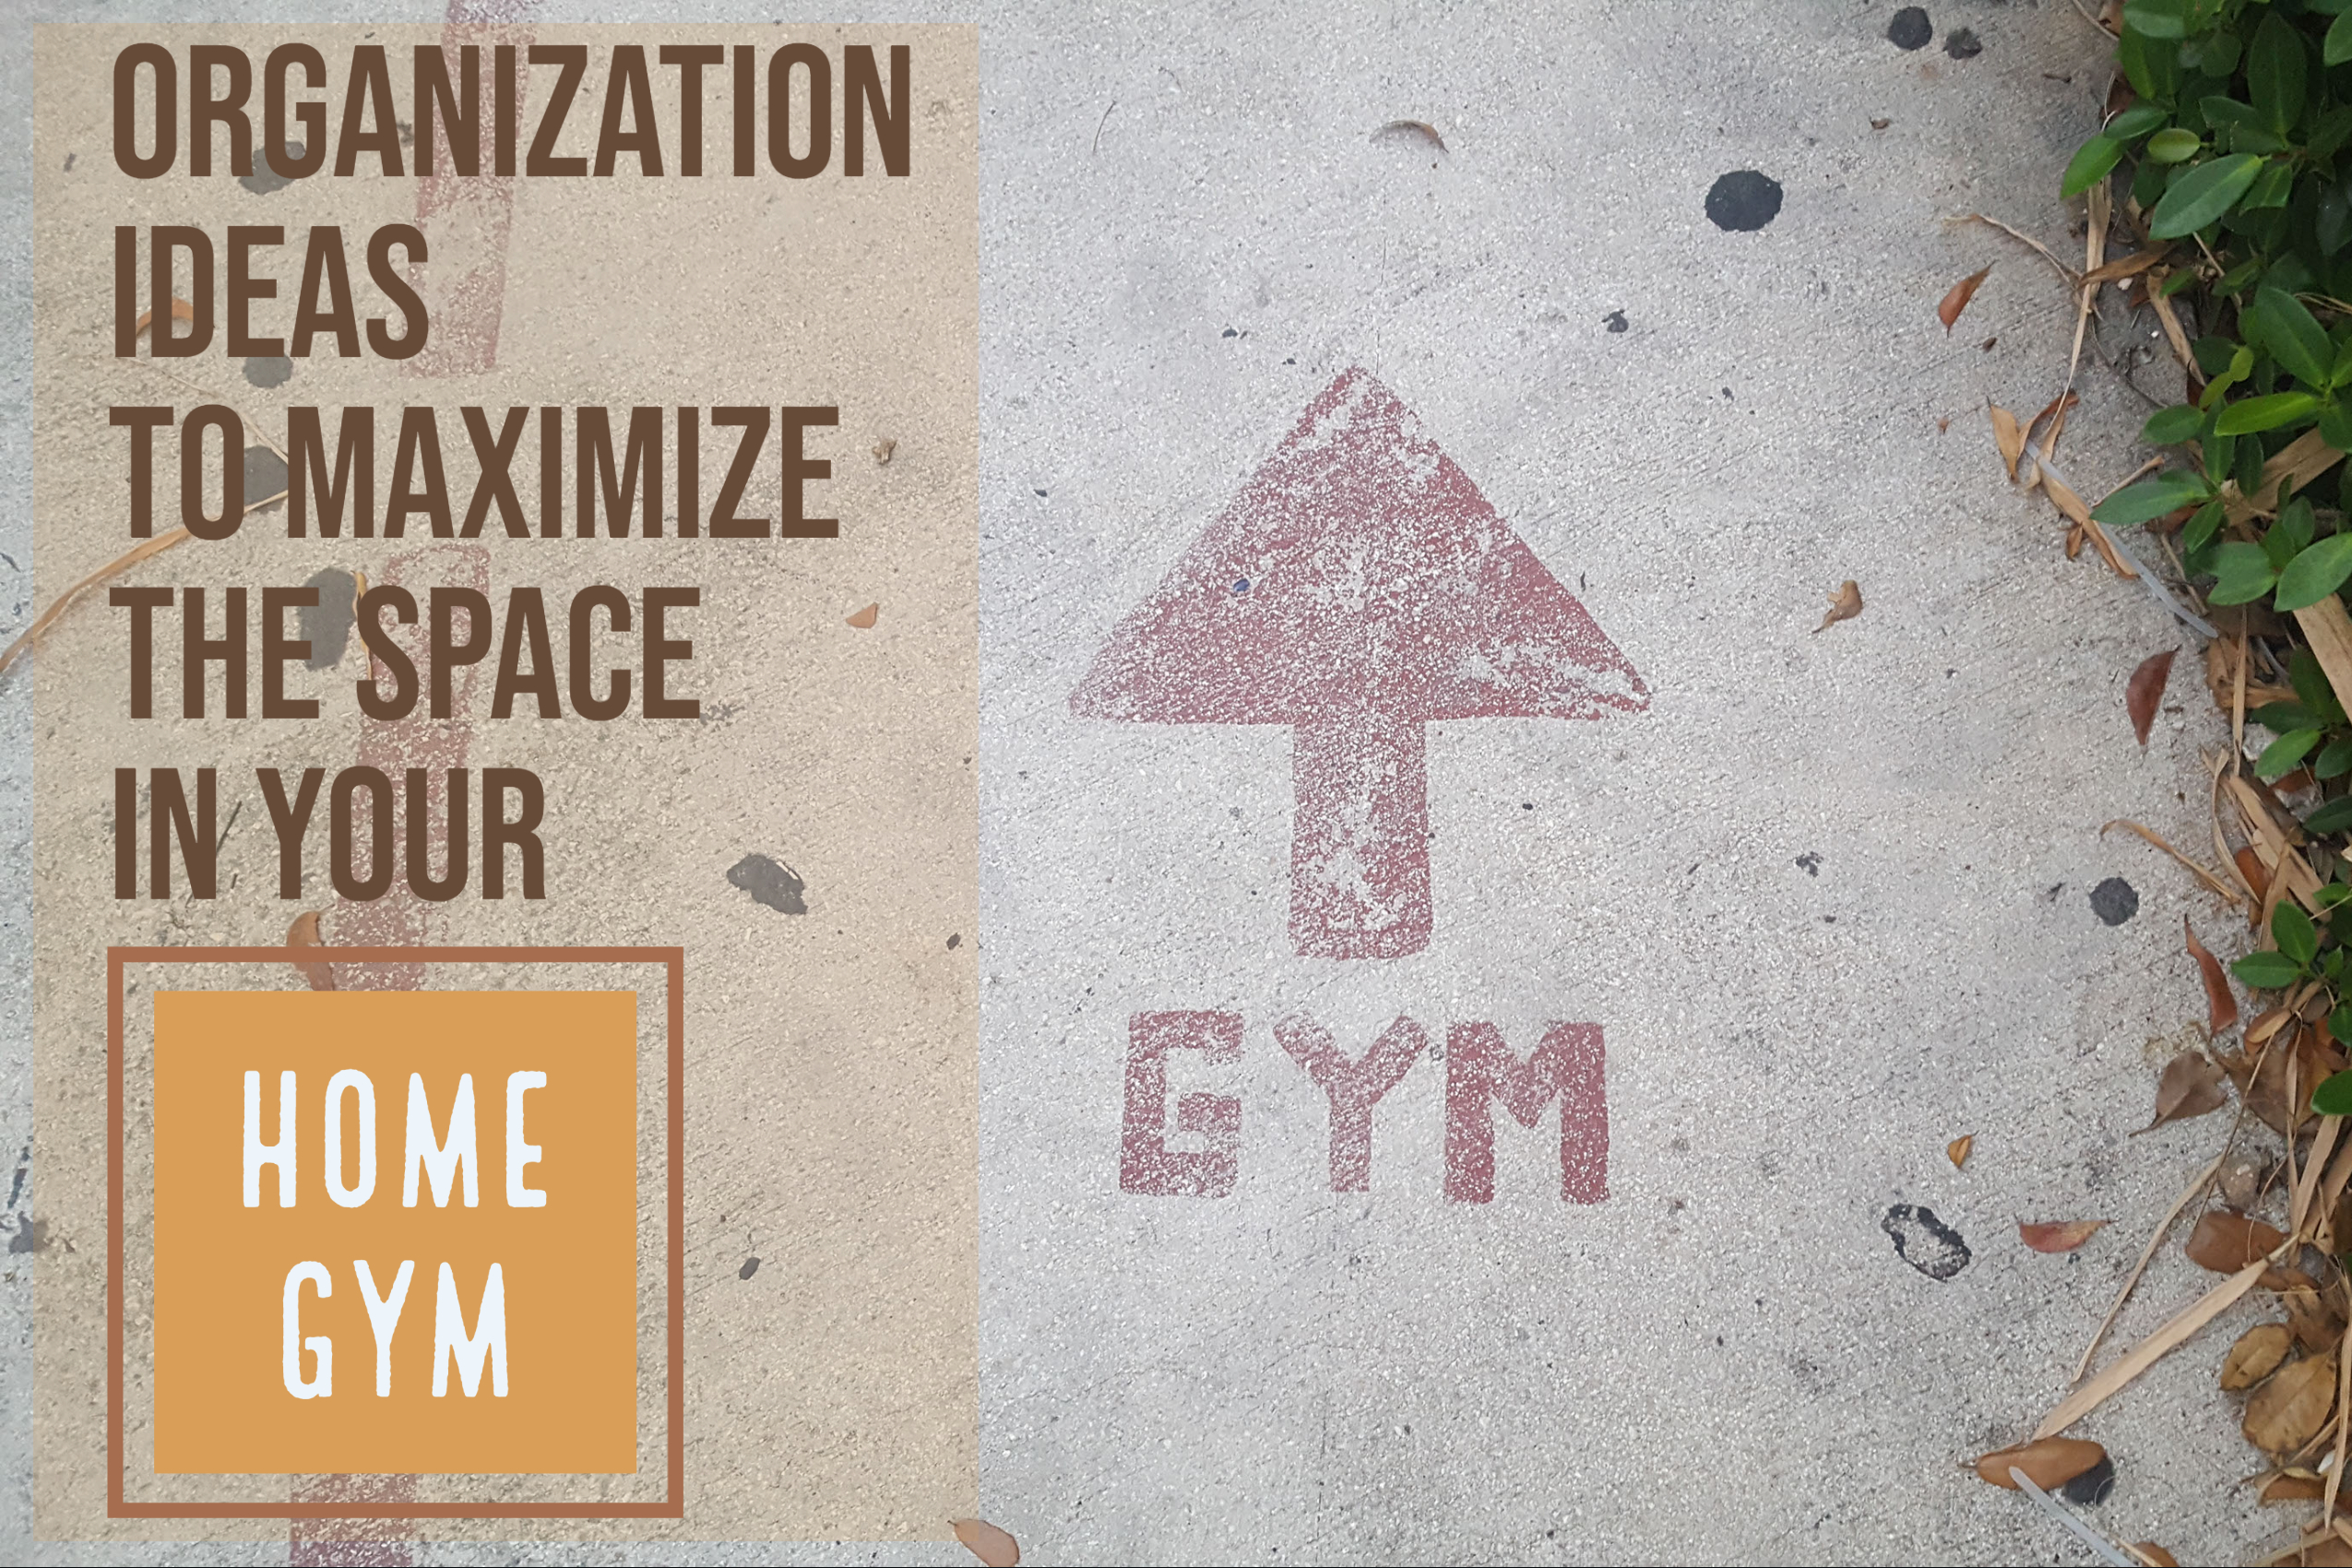 Organization Ideas To Maximize The Space In Your Home Gym Header